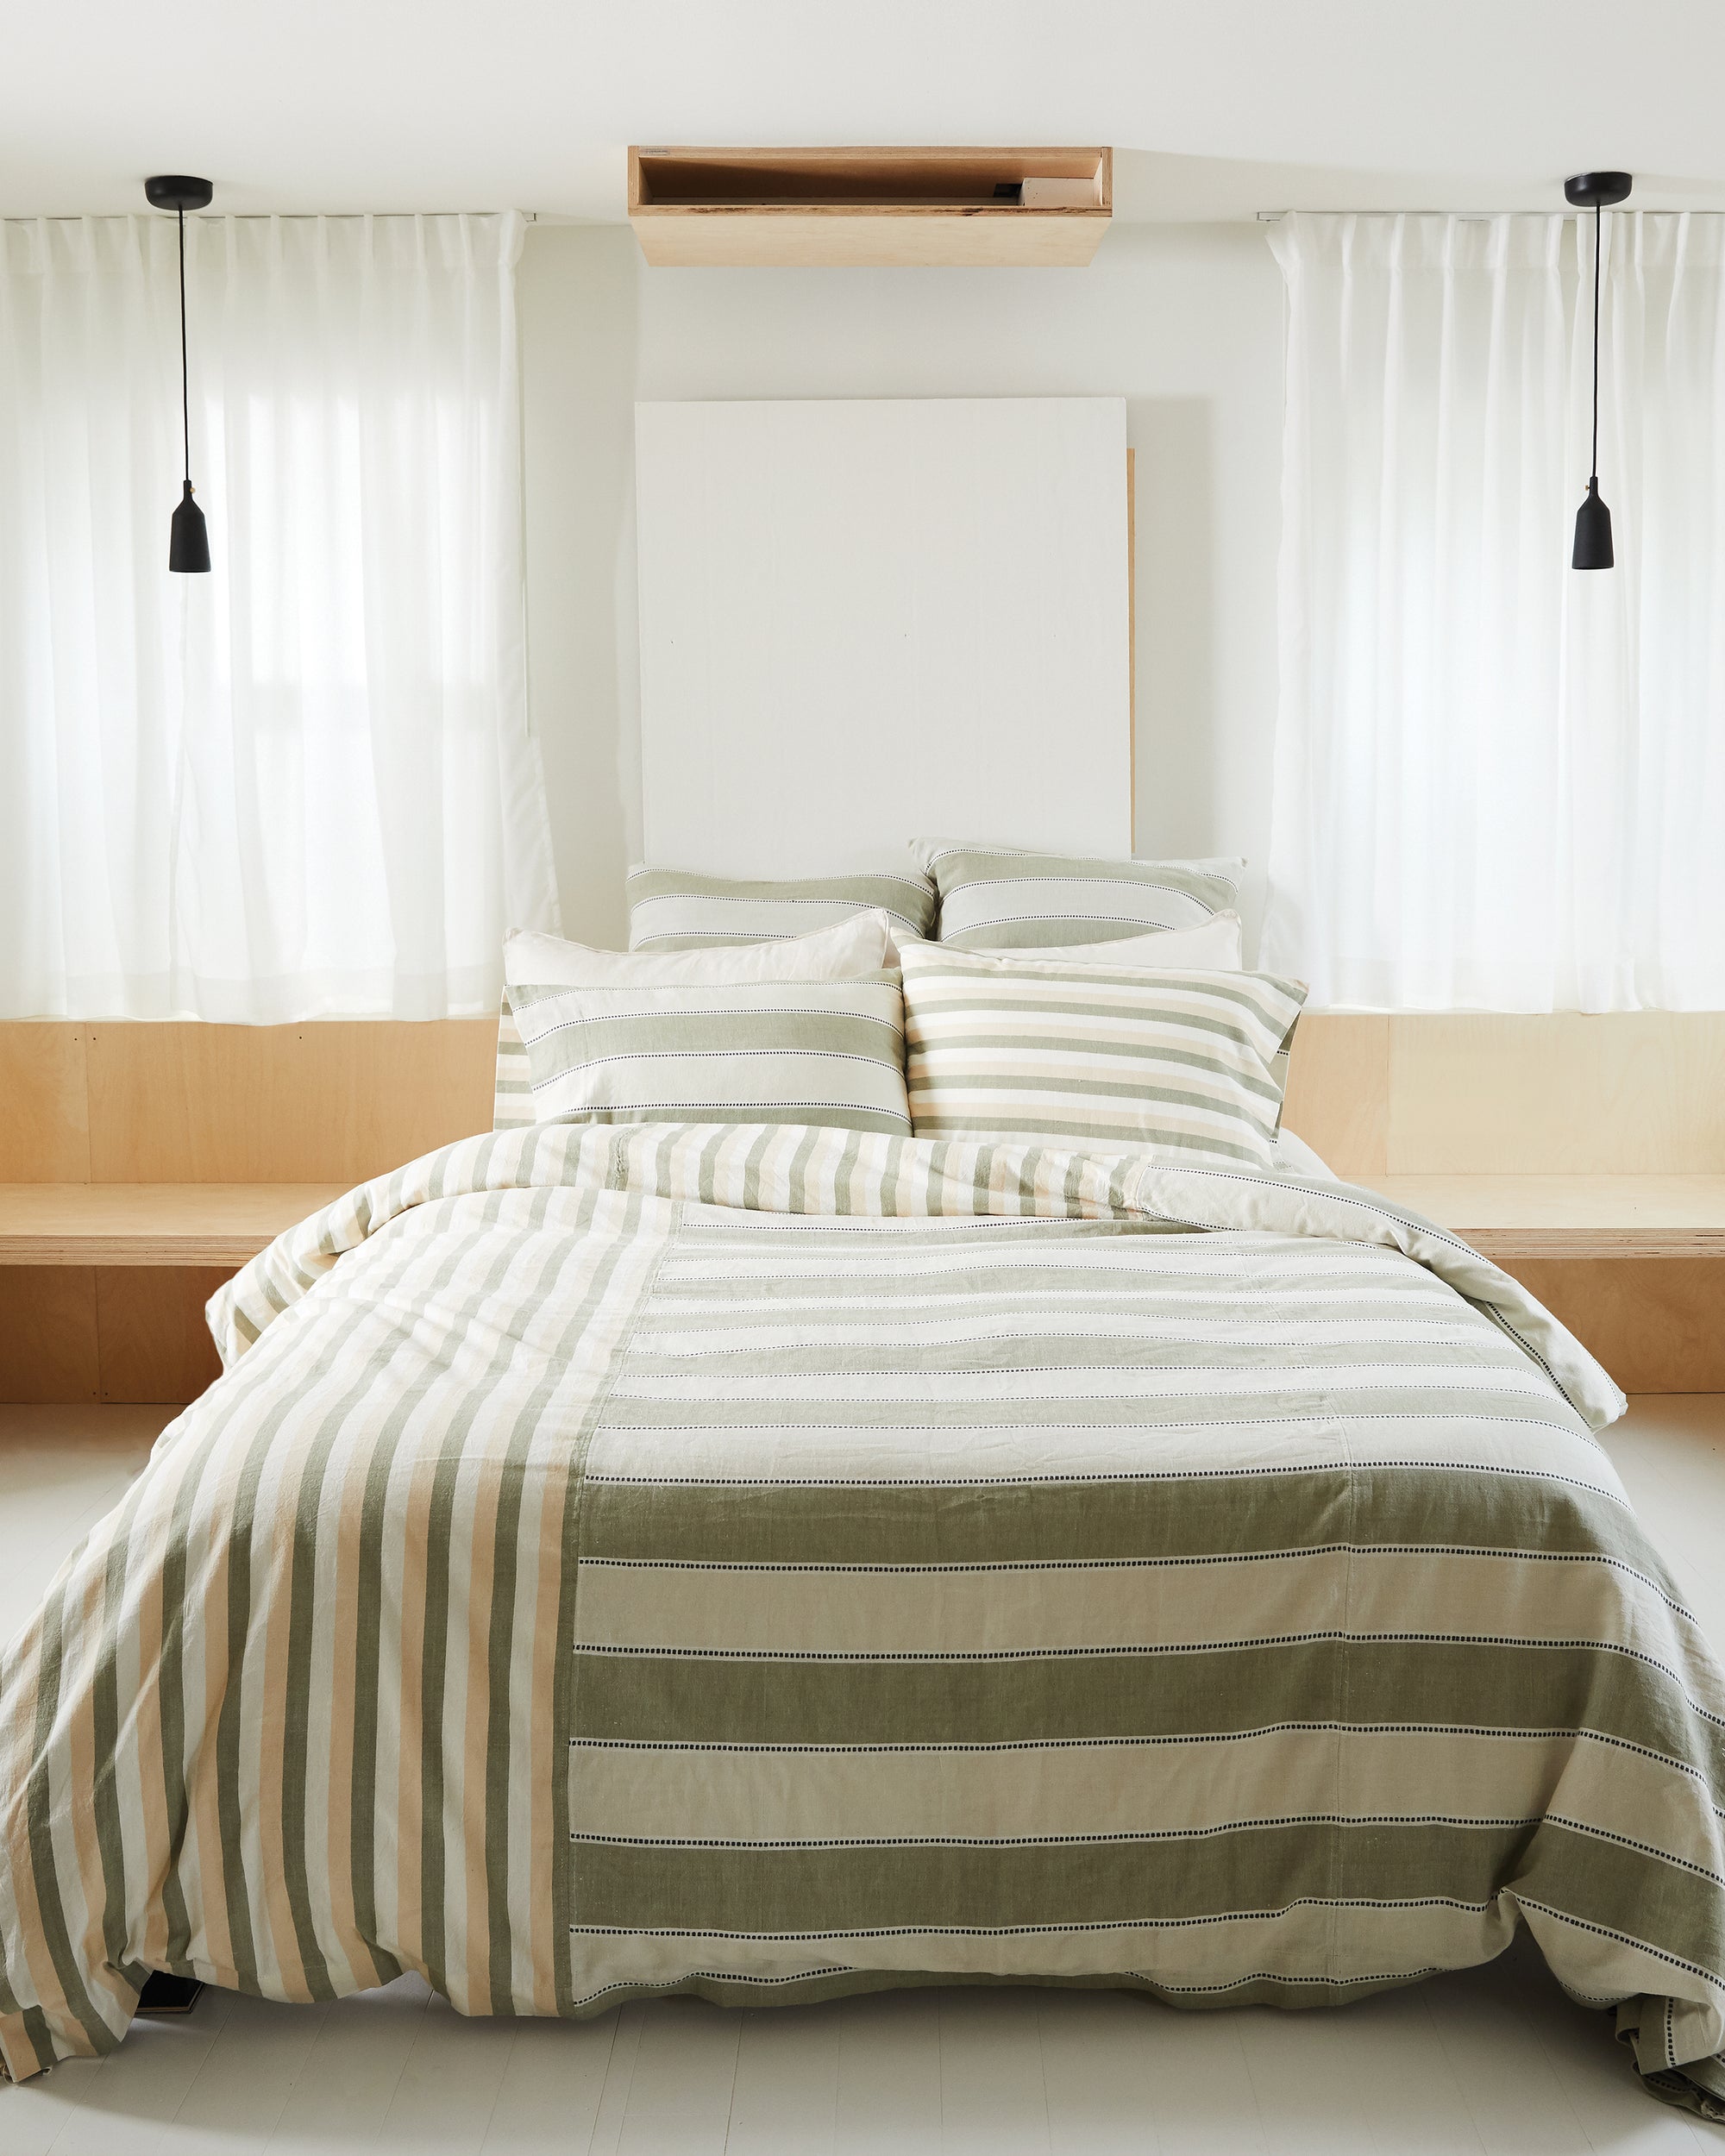 ethically handwoven oeko-tex cotton bedding designed by MINNA in sage colored neutral stripes